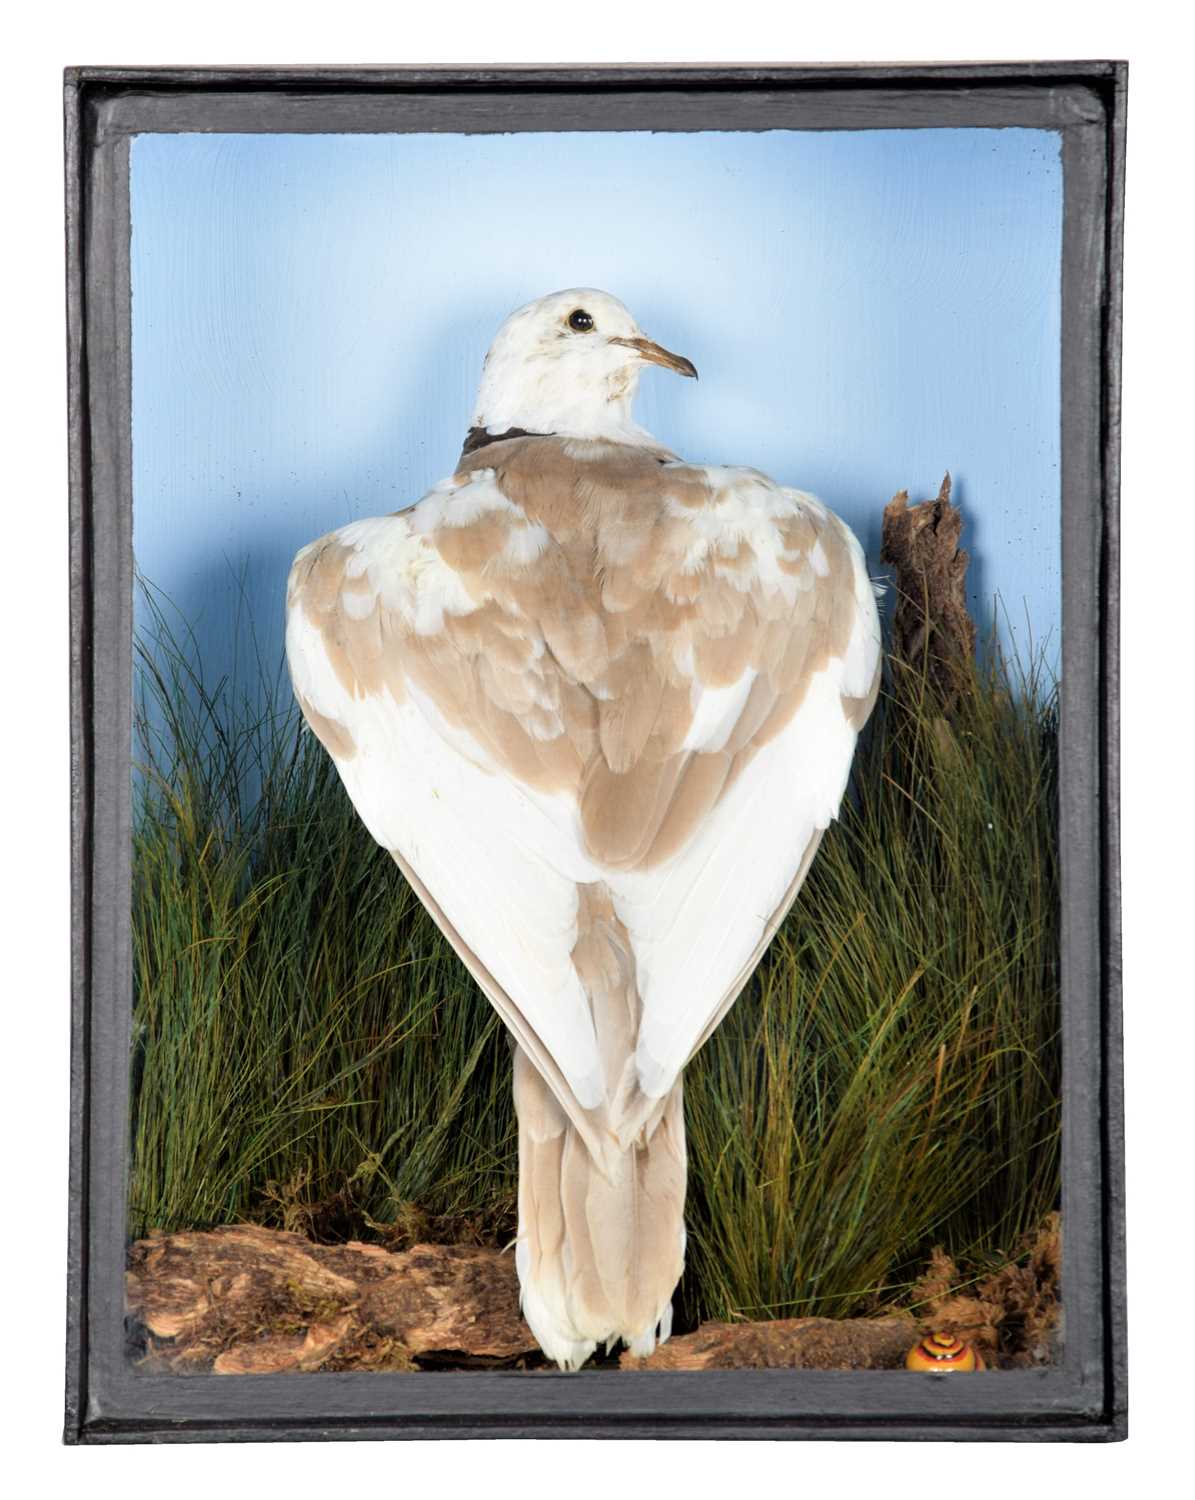 Taxidermy: A Pied Collared Dove (Streptopelia decaocto), circa 2012, a full mount adult with